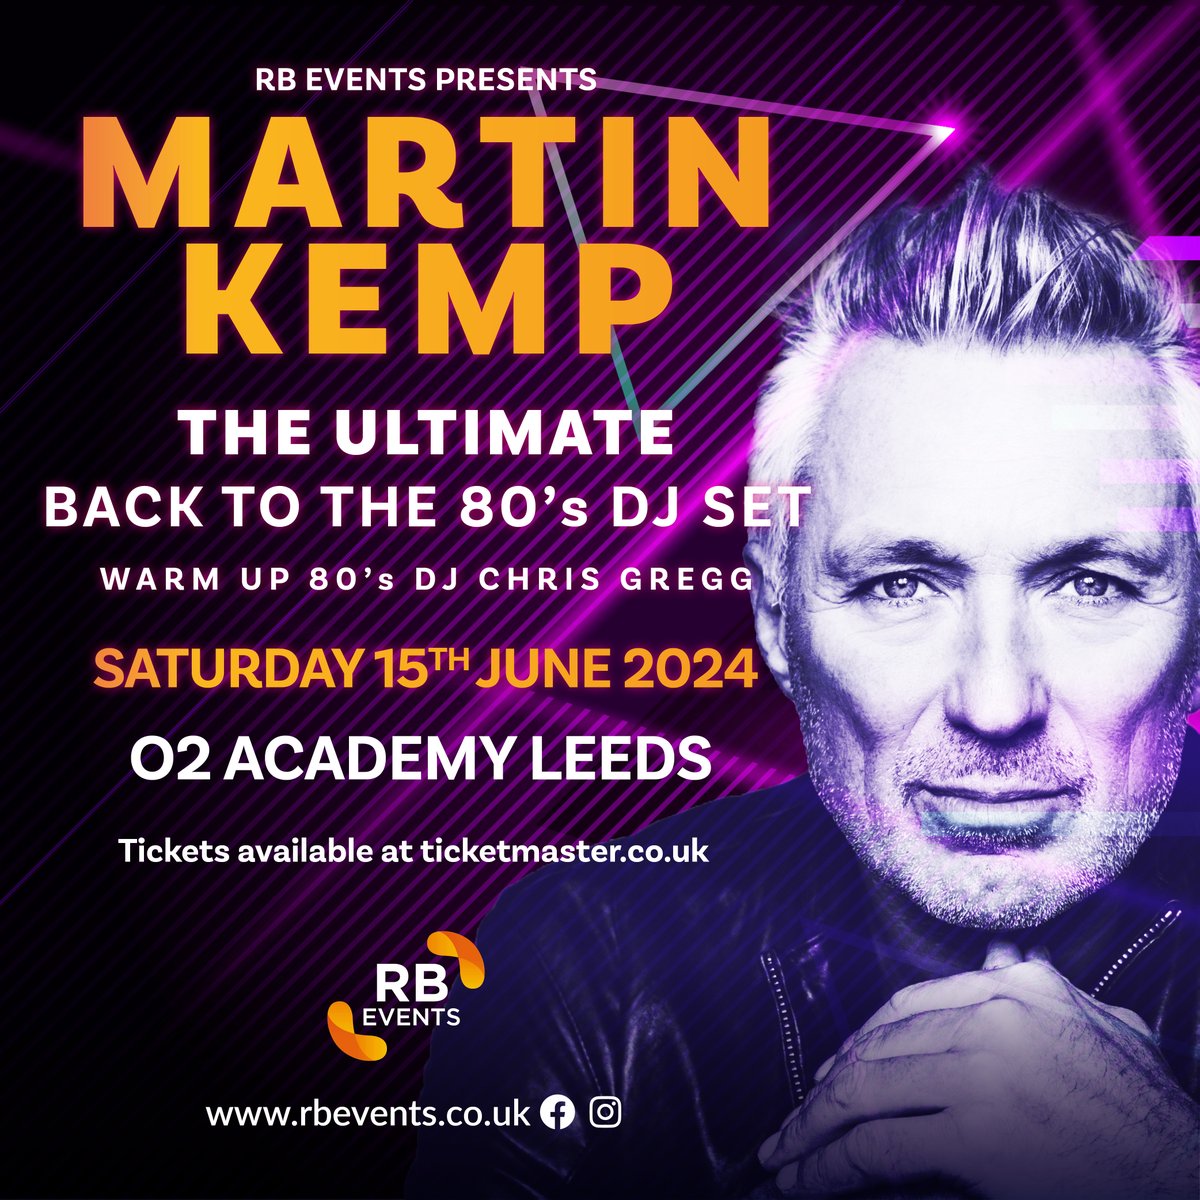 Don't miss Spandau Ballet’s @TheRealMartinKemp as he trades his bass for the decks and spins the biggest and best hits from the 1980s! 🕺 Here on Sat 15 Jun, grab your tickets now 👉 amg-venues.com/9Cry50Rp67M